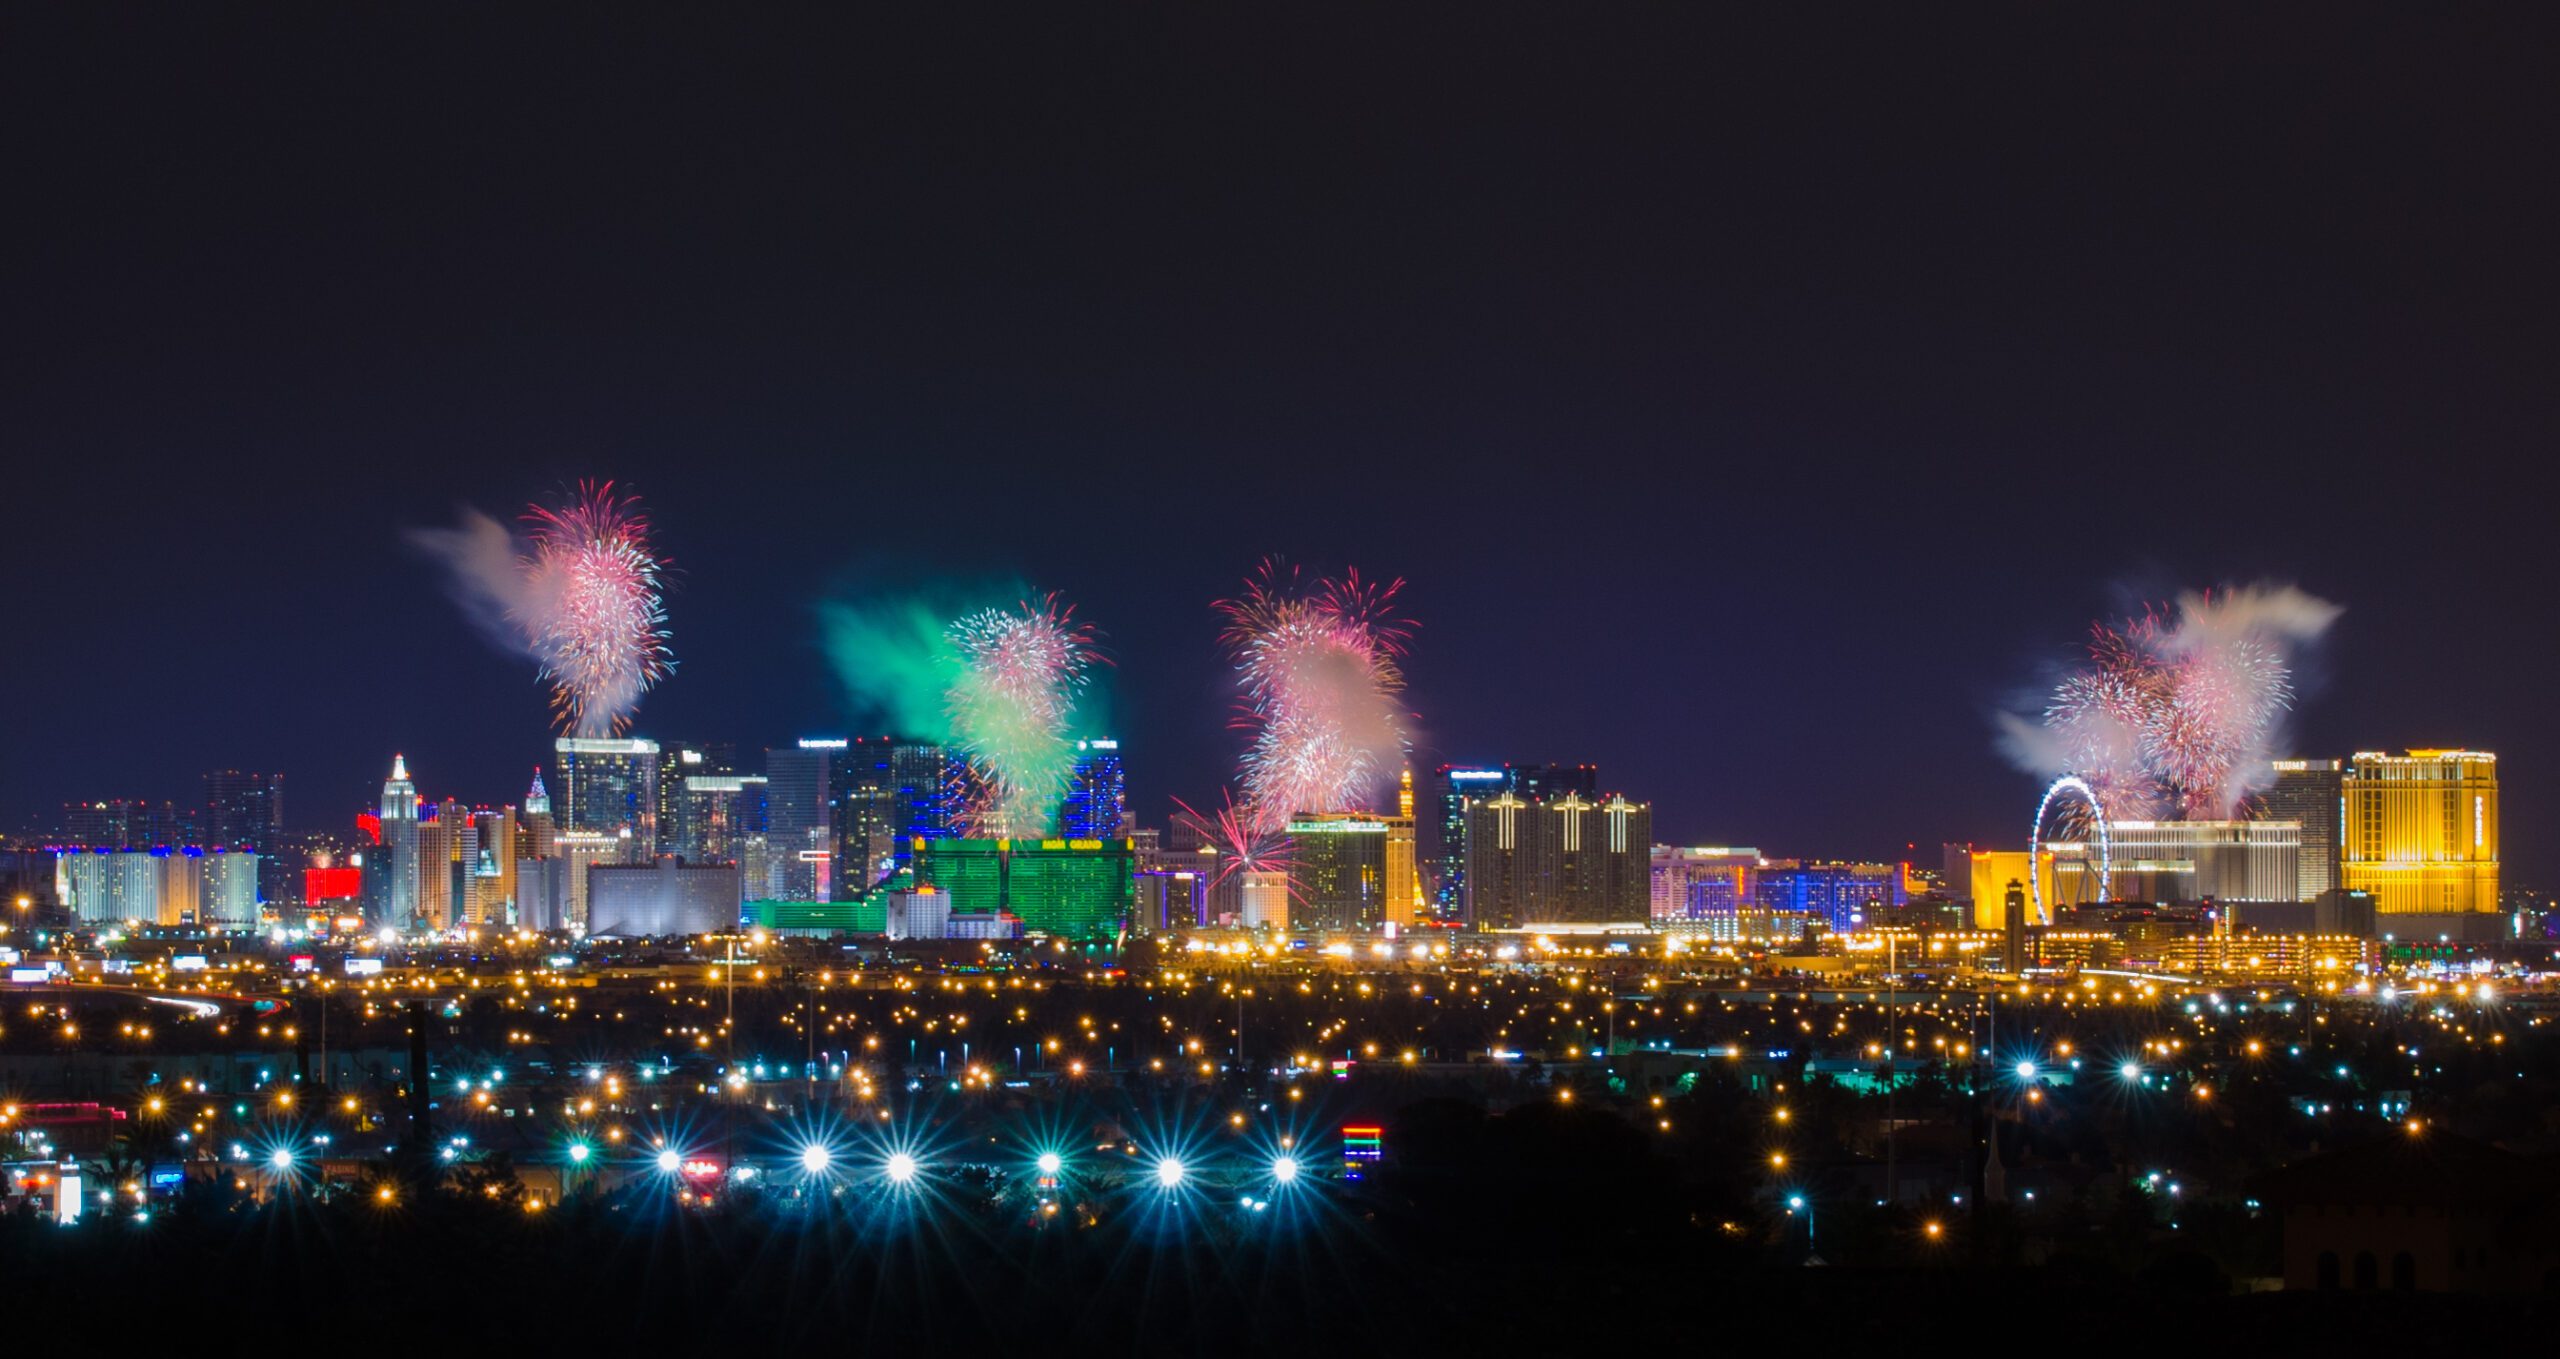 Fireworks on the 4th of July in Las Vegas